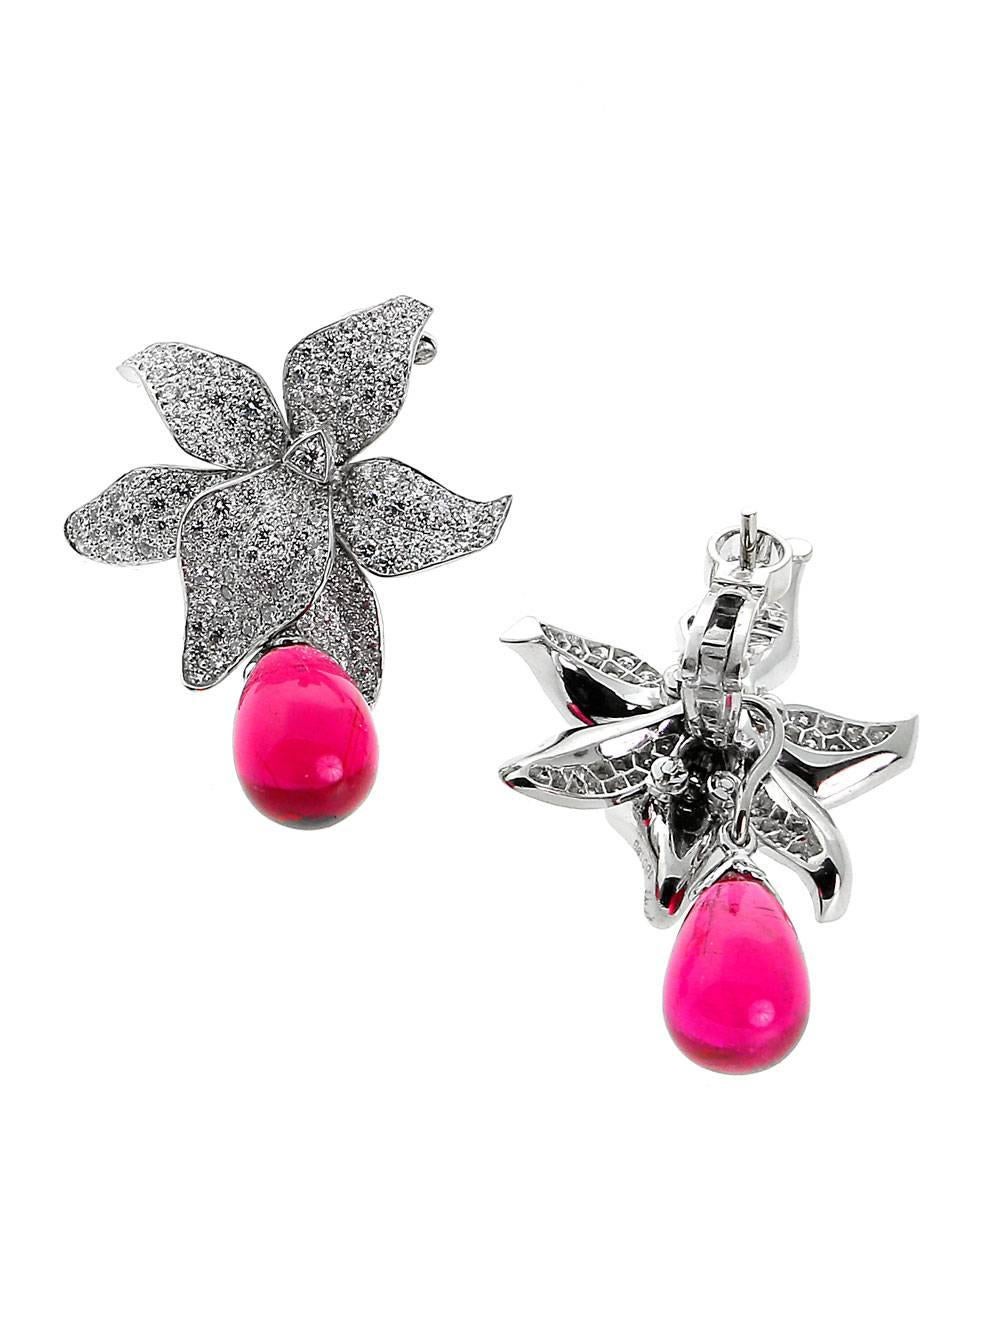 Cartier Caresse Rubellite Platinum earrings are set with 362 round diamonds that total 2.49 carats while the adornment piece’s rubellites weigh in at 10.94 carets ensuring a bold style combined with classic appeal. In addition, the choice of